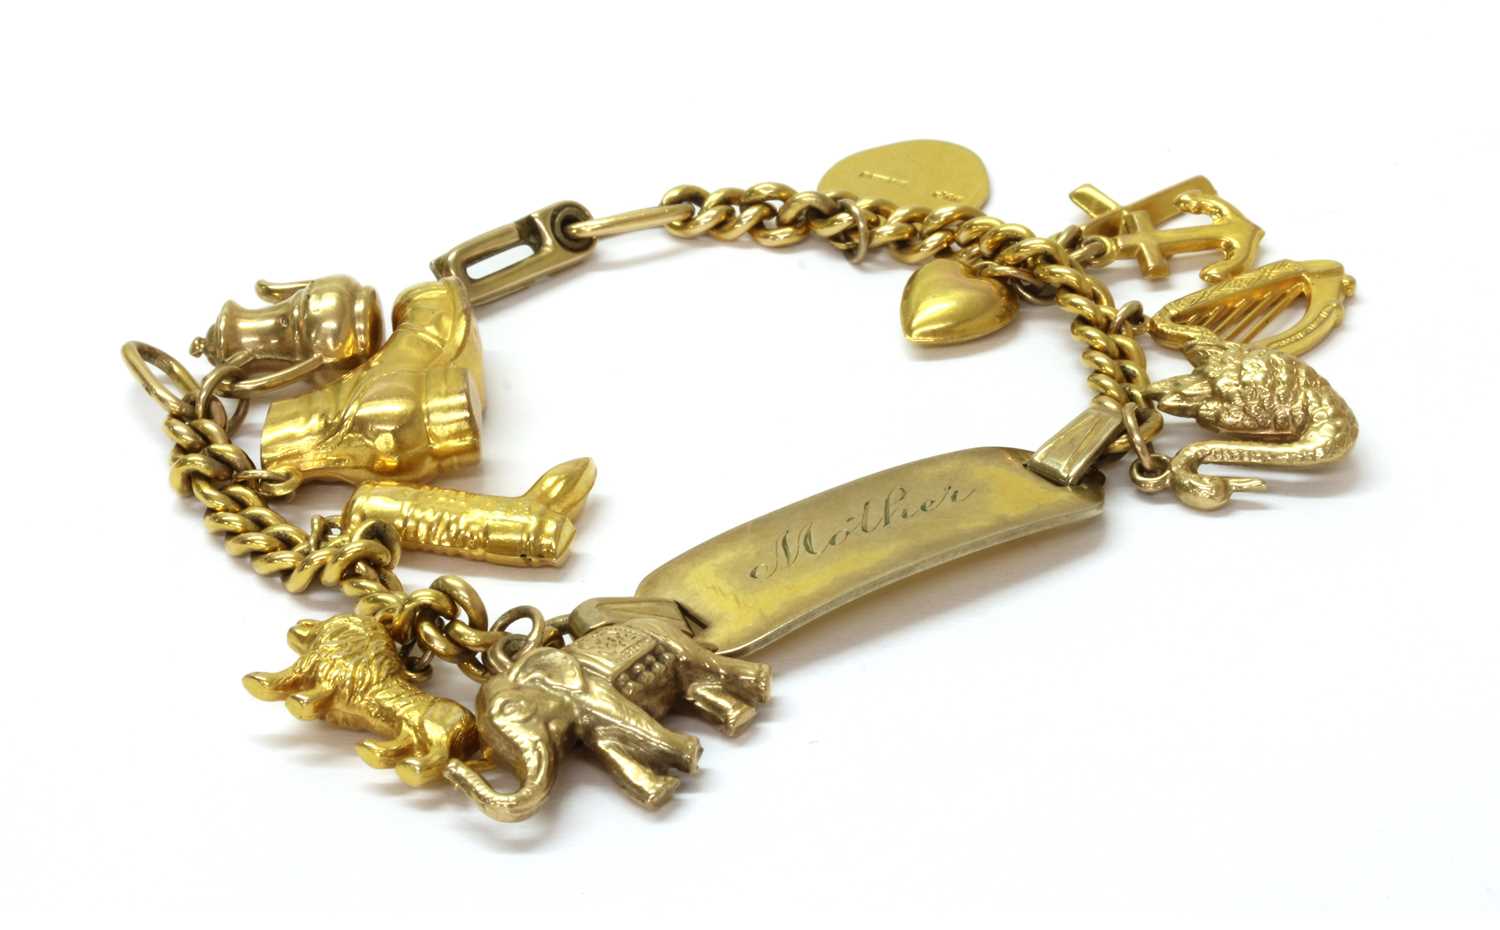 Lot 200 - A gold filled identity bracelet with gold charms